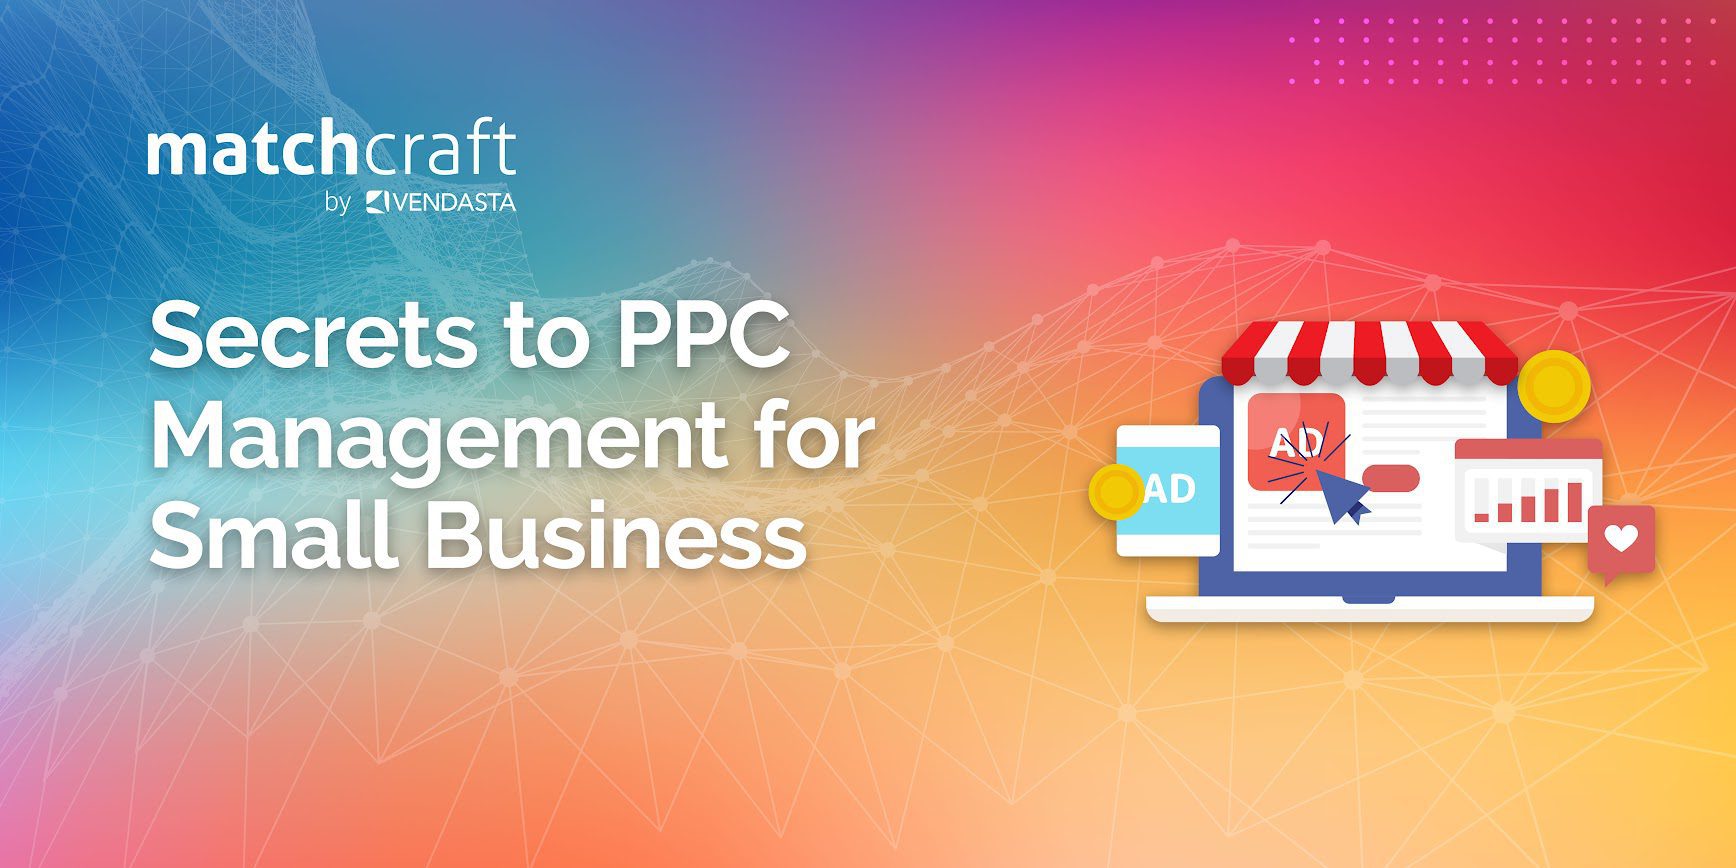 Secrets to PPC Management for Small Business You Need to Know